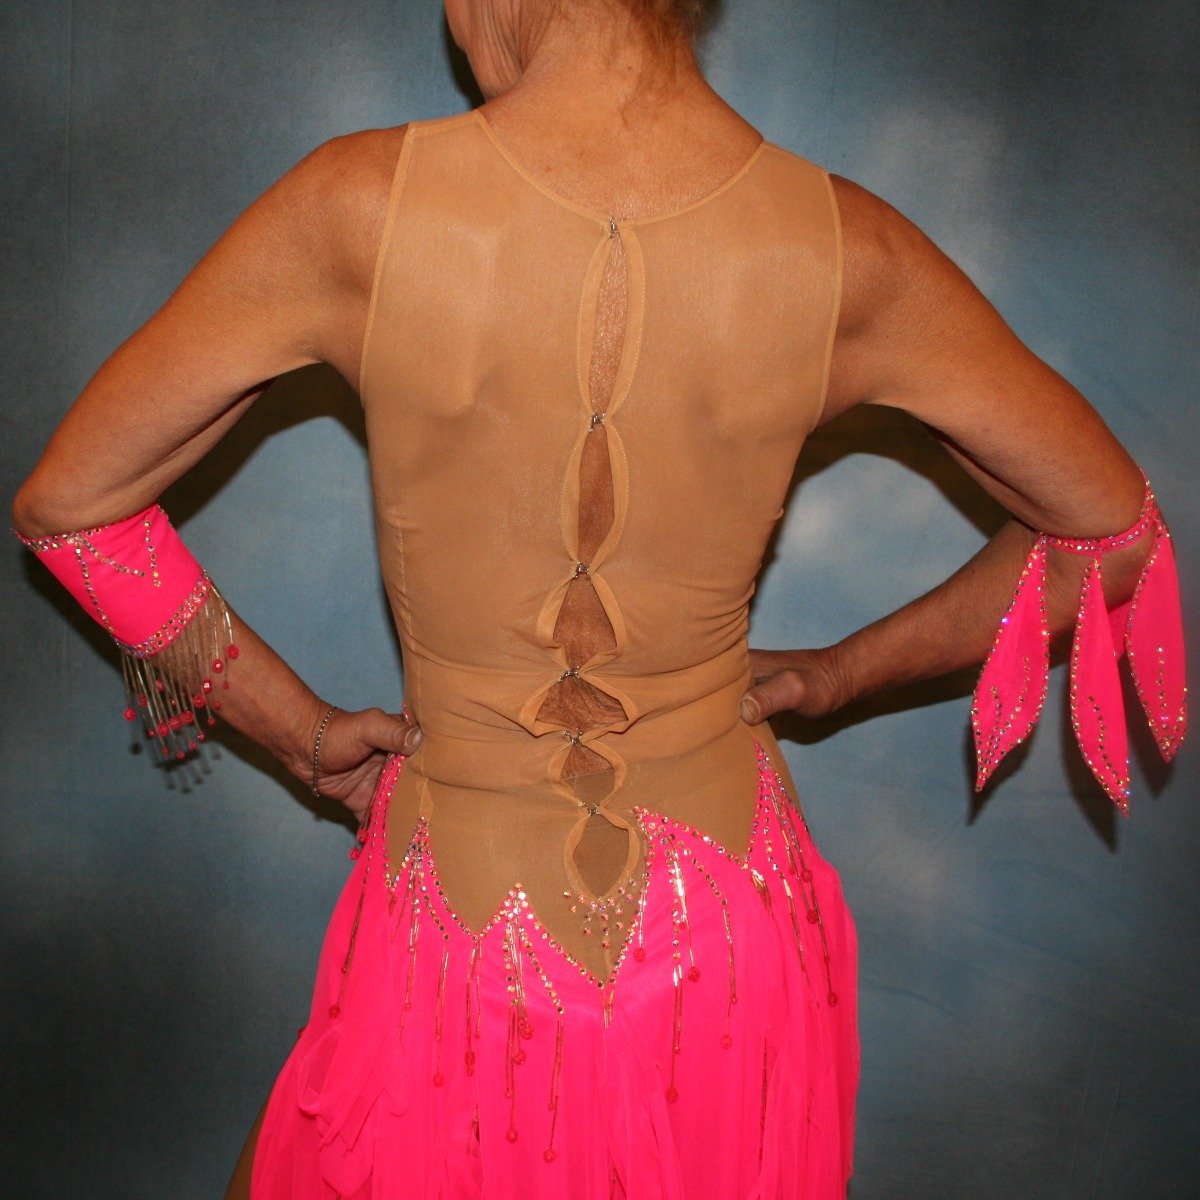 close back view of Hot pink Latin dress created of hot pink tricot chiffon overlayed on nude illusion base with flame effect is embellished with CAB Sawovski rhinestones & hand beading on sale!